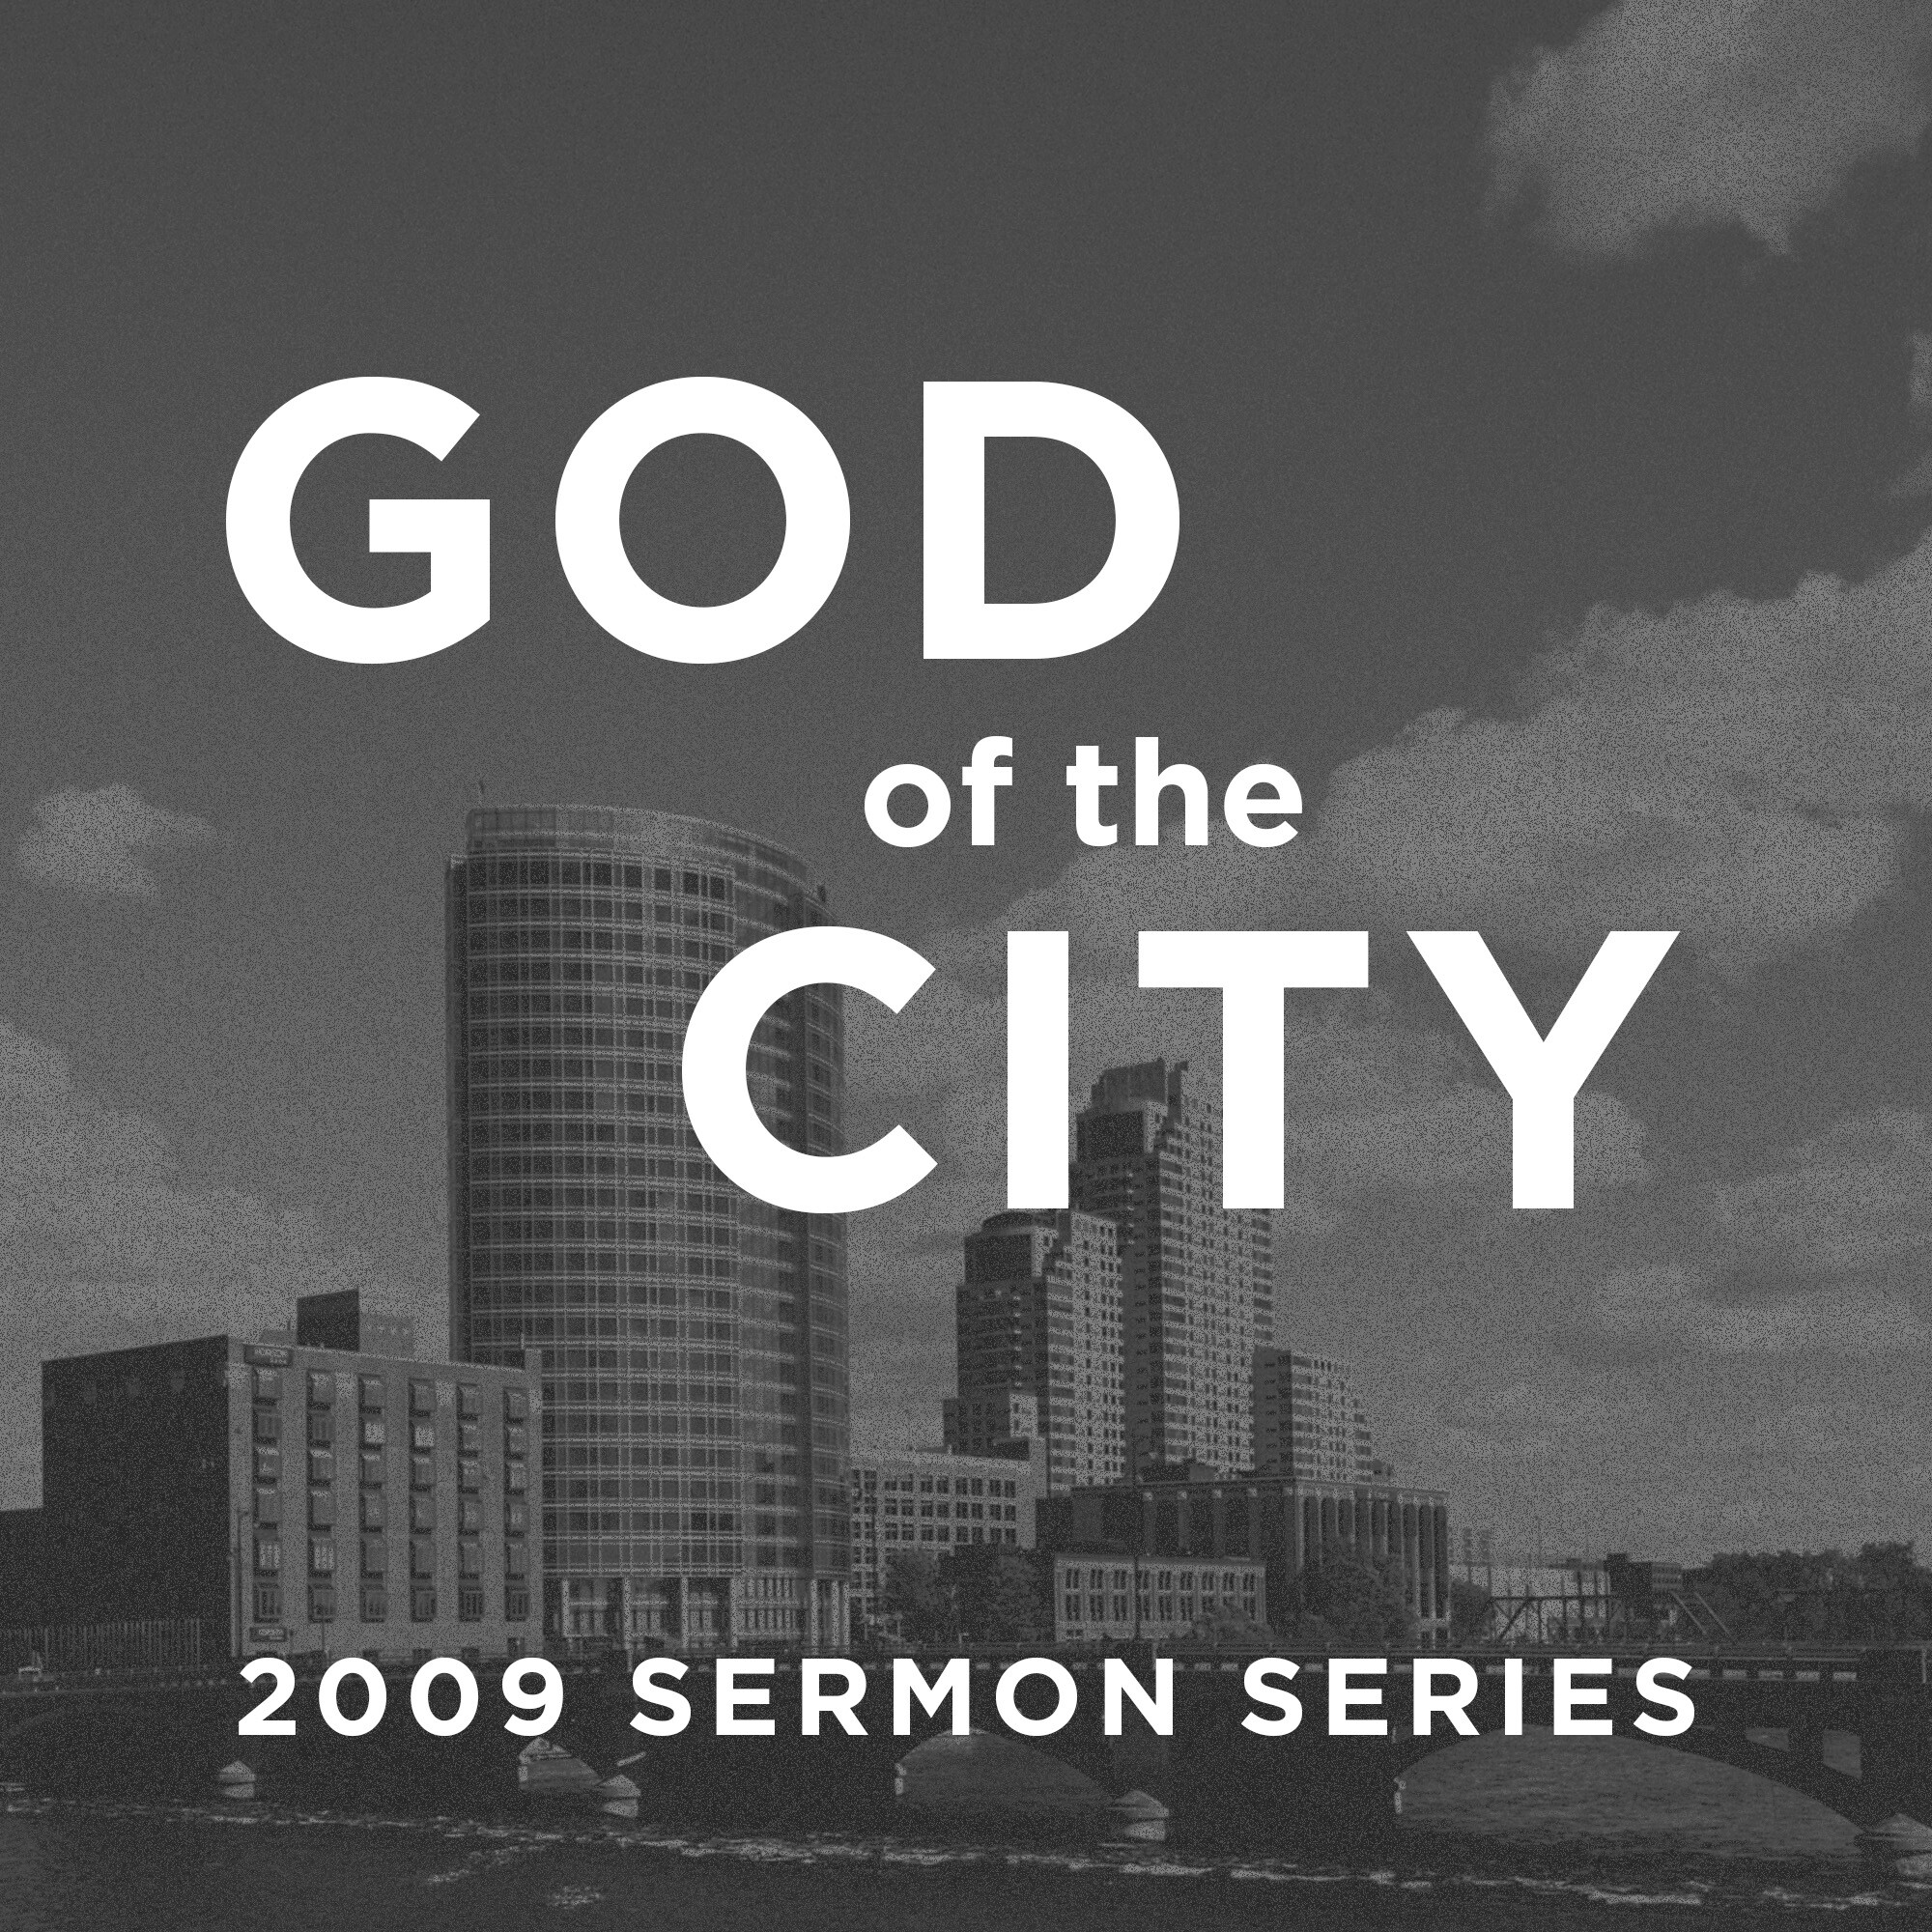 God Of The City: God's love for the City